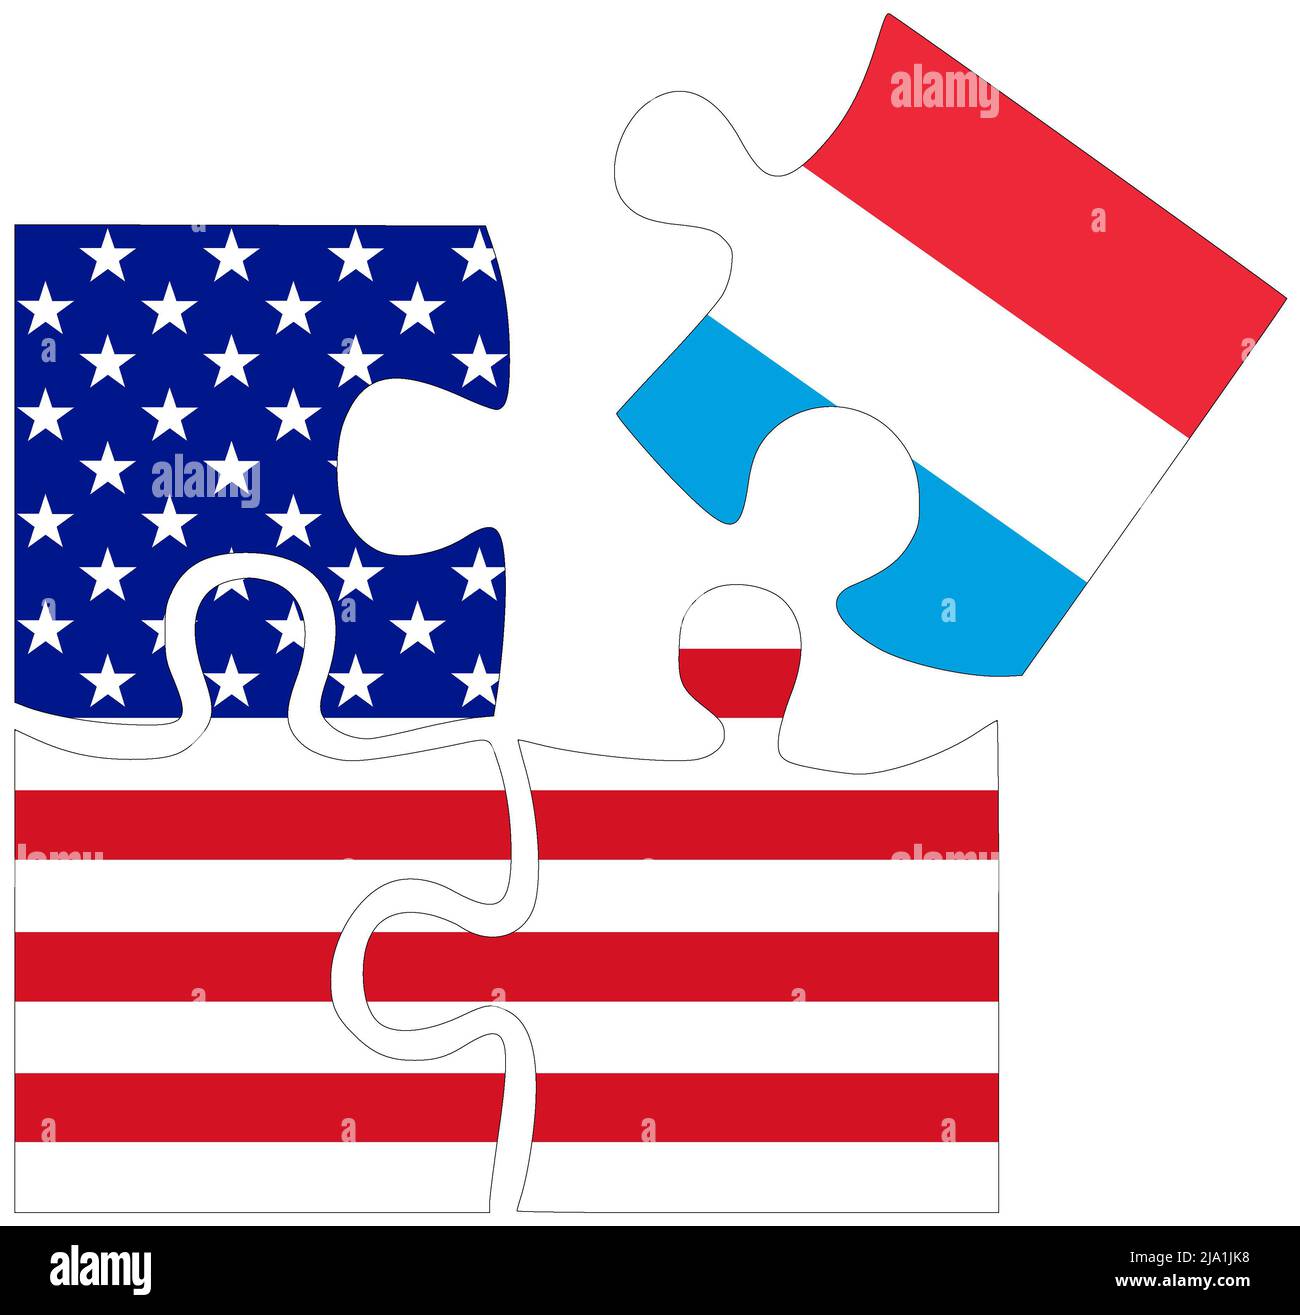 USA - Luxembourg : puzzle shapes with flags, symbol of agreement or friendship Stock Photo